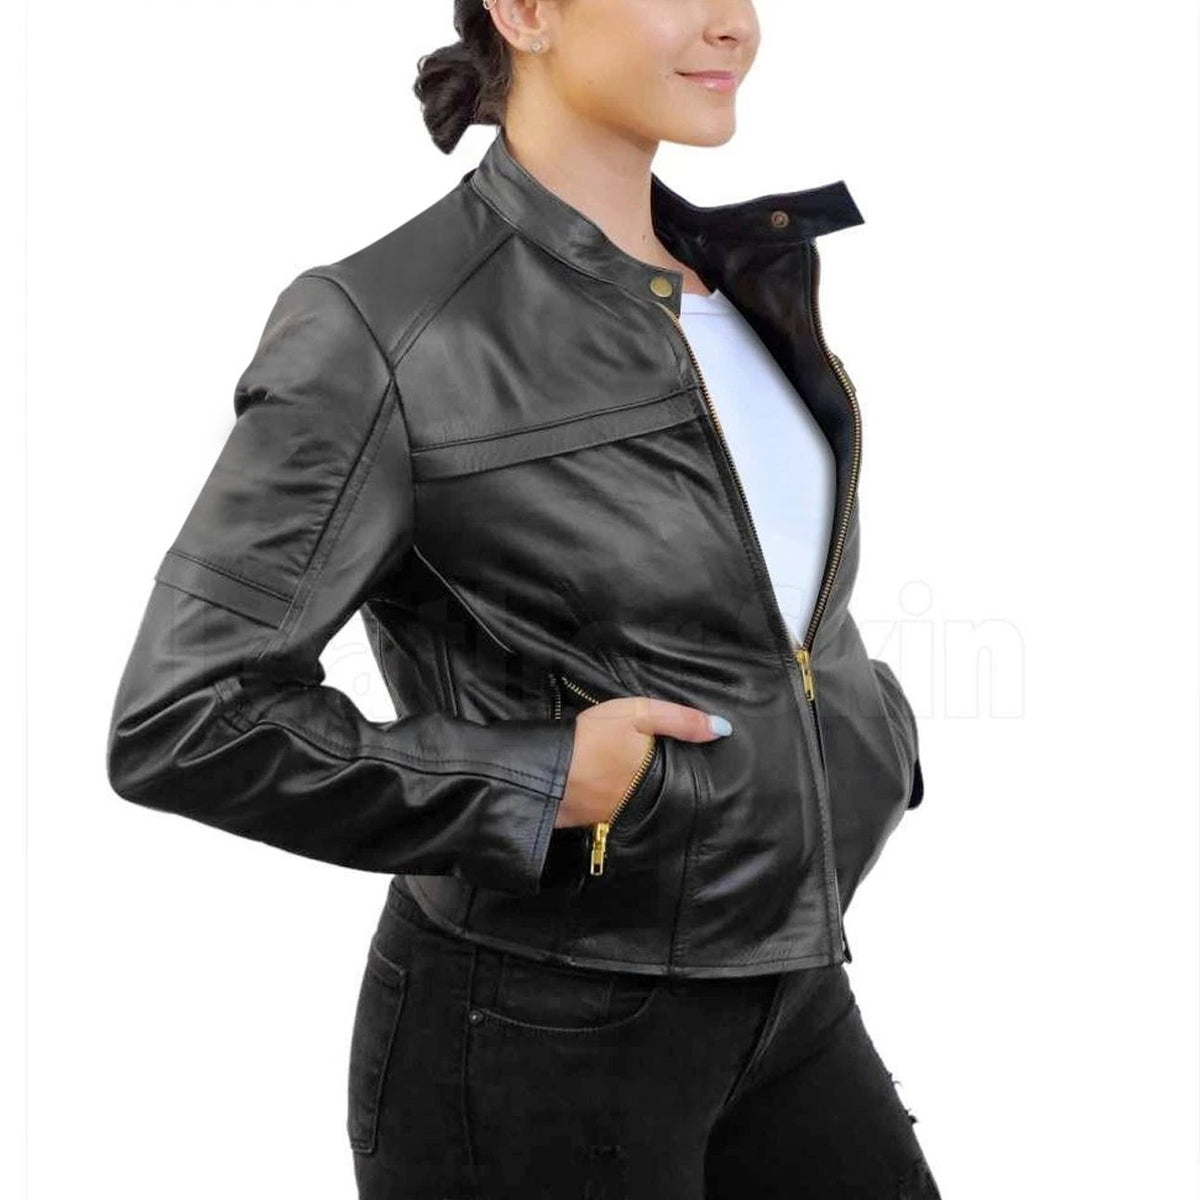 Black Biker Leather Jacket with Gold Zippers for Women - Leather Skin Shop